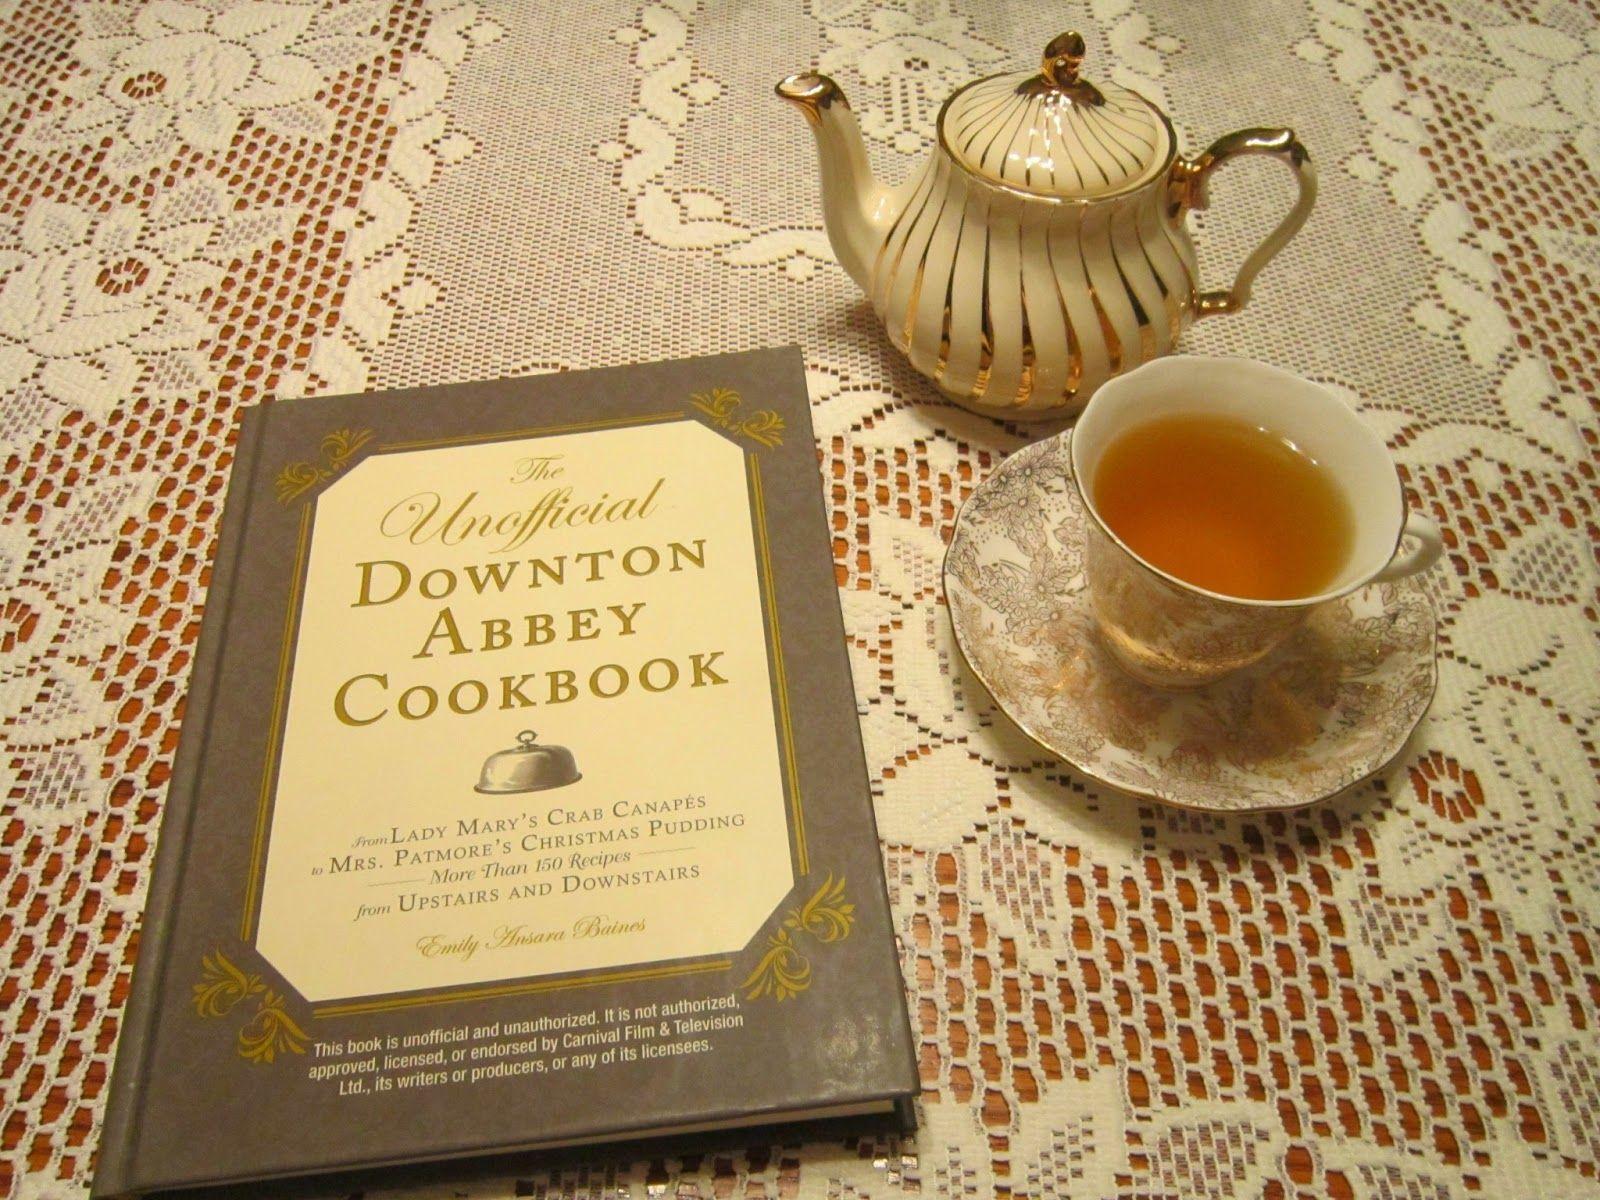 Relevant Tea Leaf: Winter Time Reading With Tea